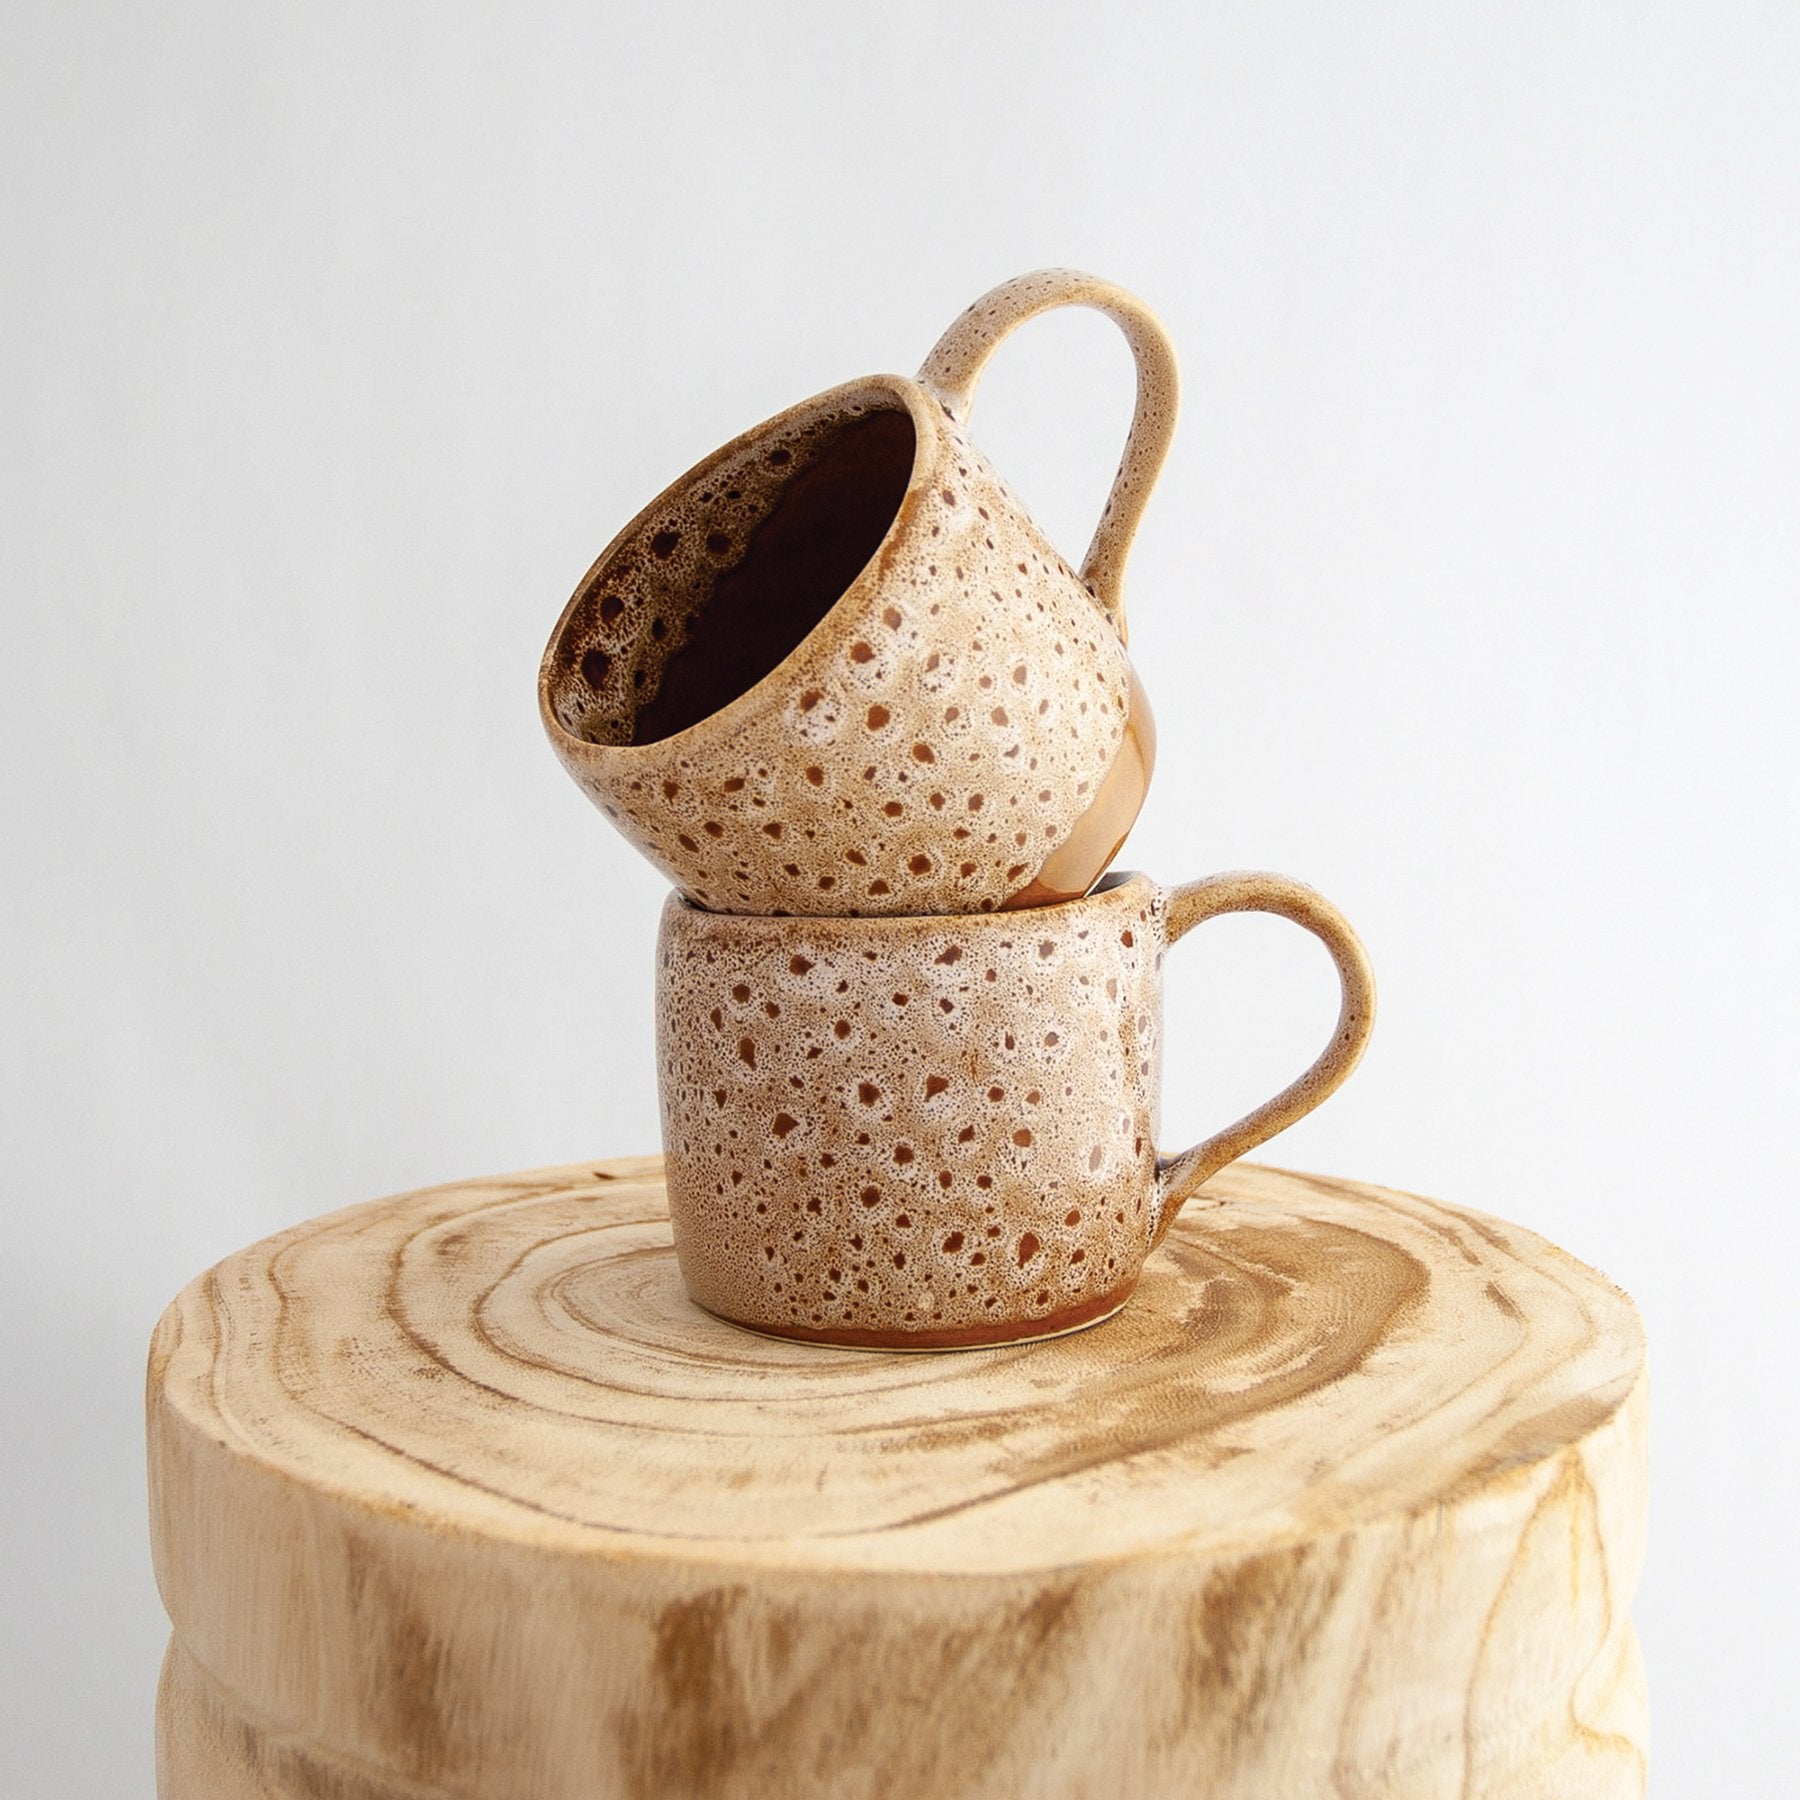 Two Robert Gordon white ochre organic mugs stacked on a natural wooden round side table